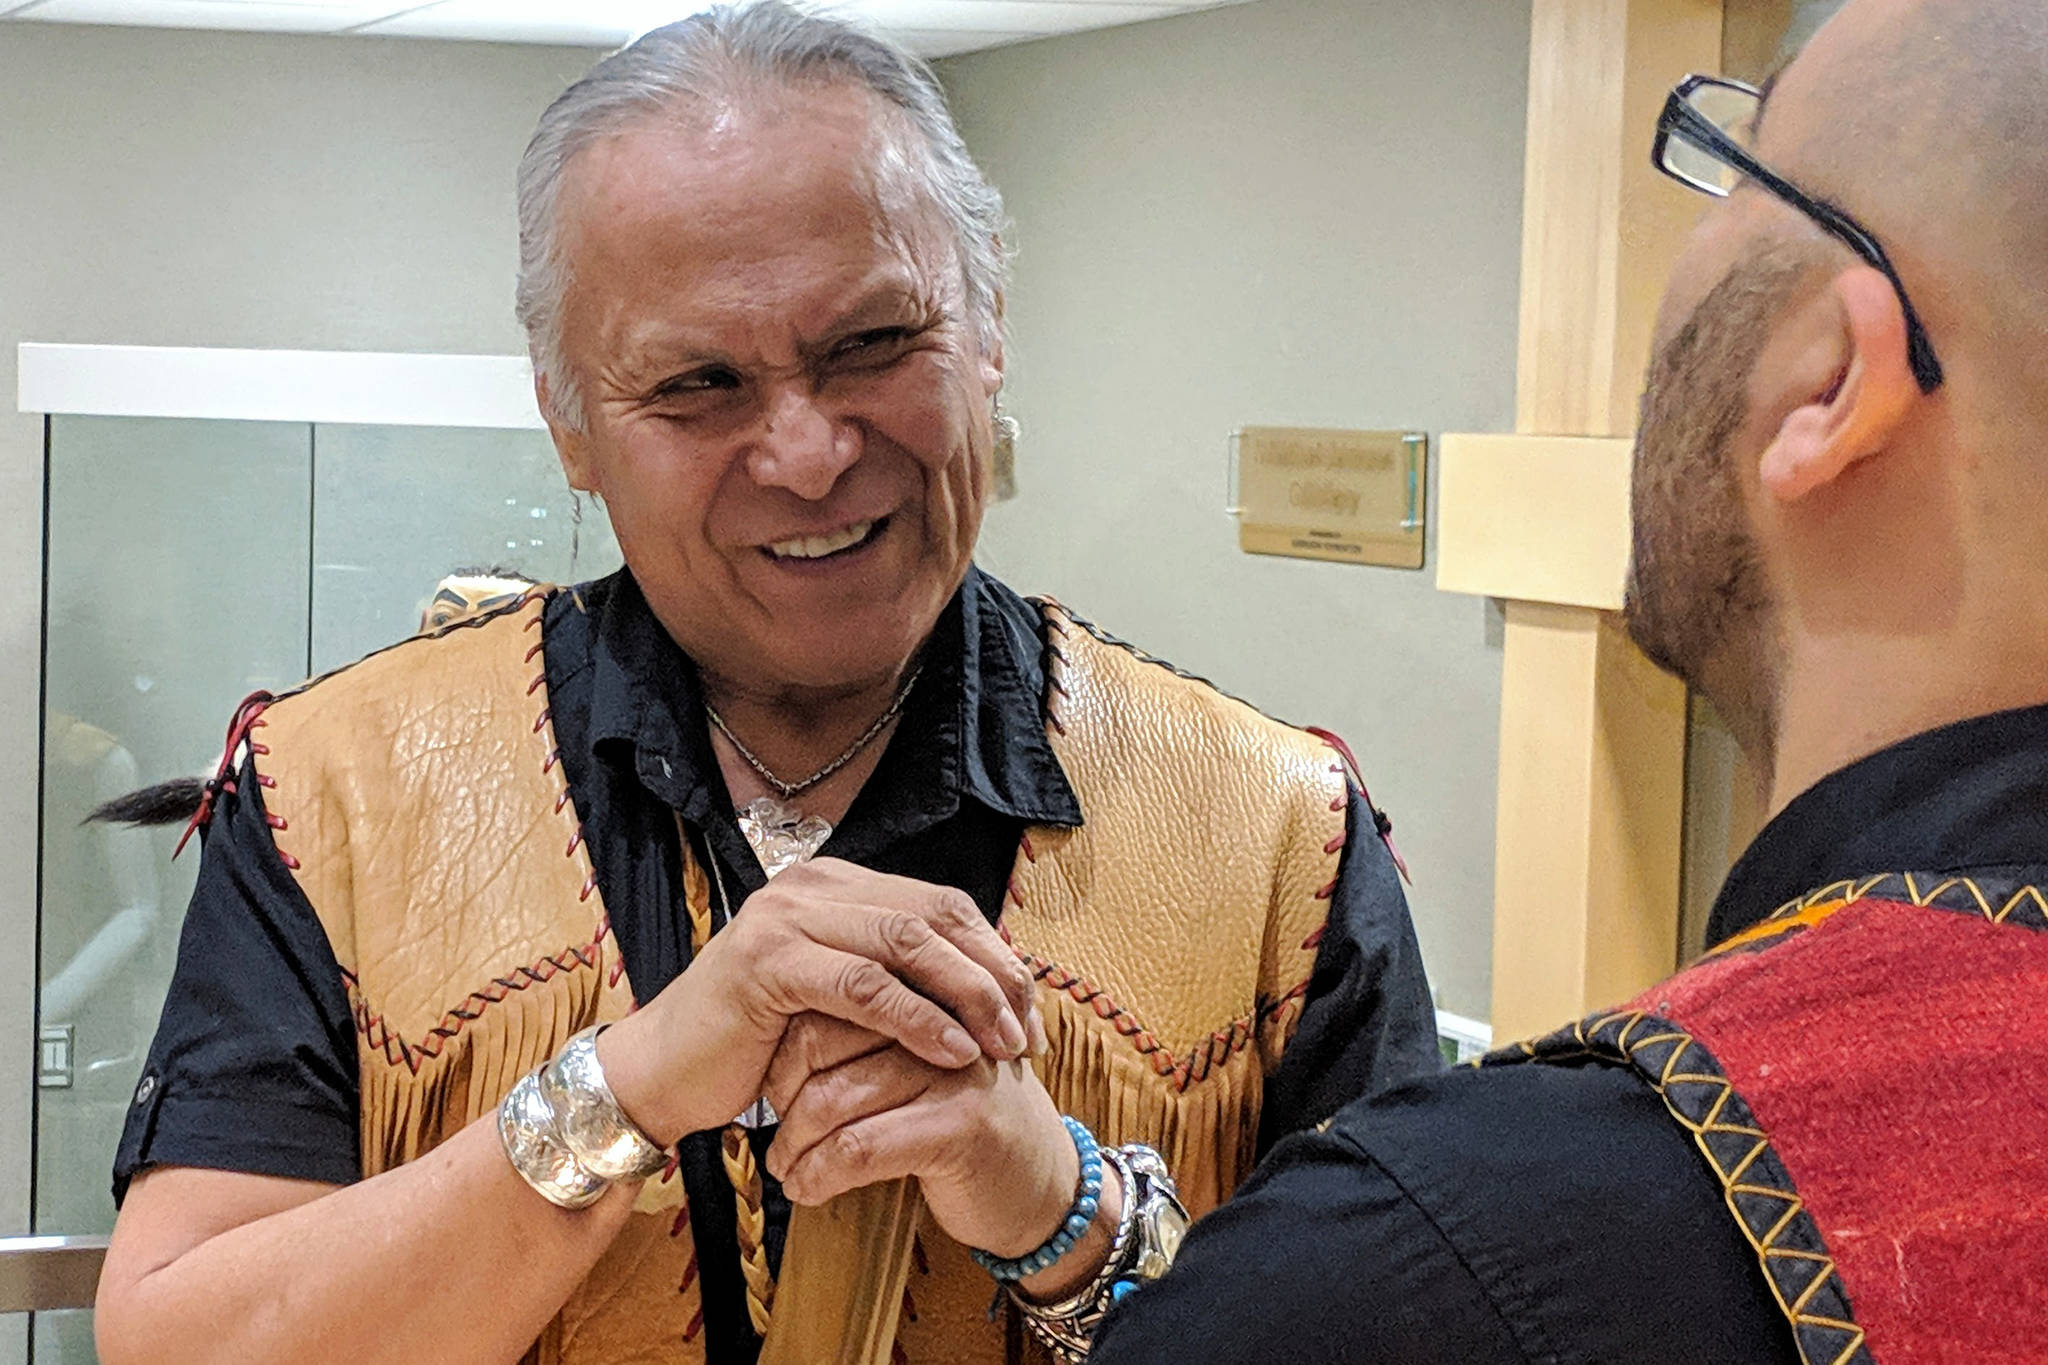 Tlingit flautist George Montero said he was glad to be back in Juneau for a pair of concerts Saturday, Jan. 19, 2019 and Tuesday, Jan. 22, 2019. (Ben Hohenstatt |Capital City Weekly)